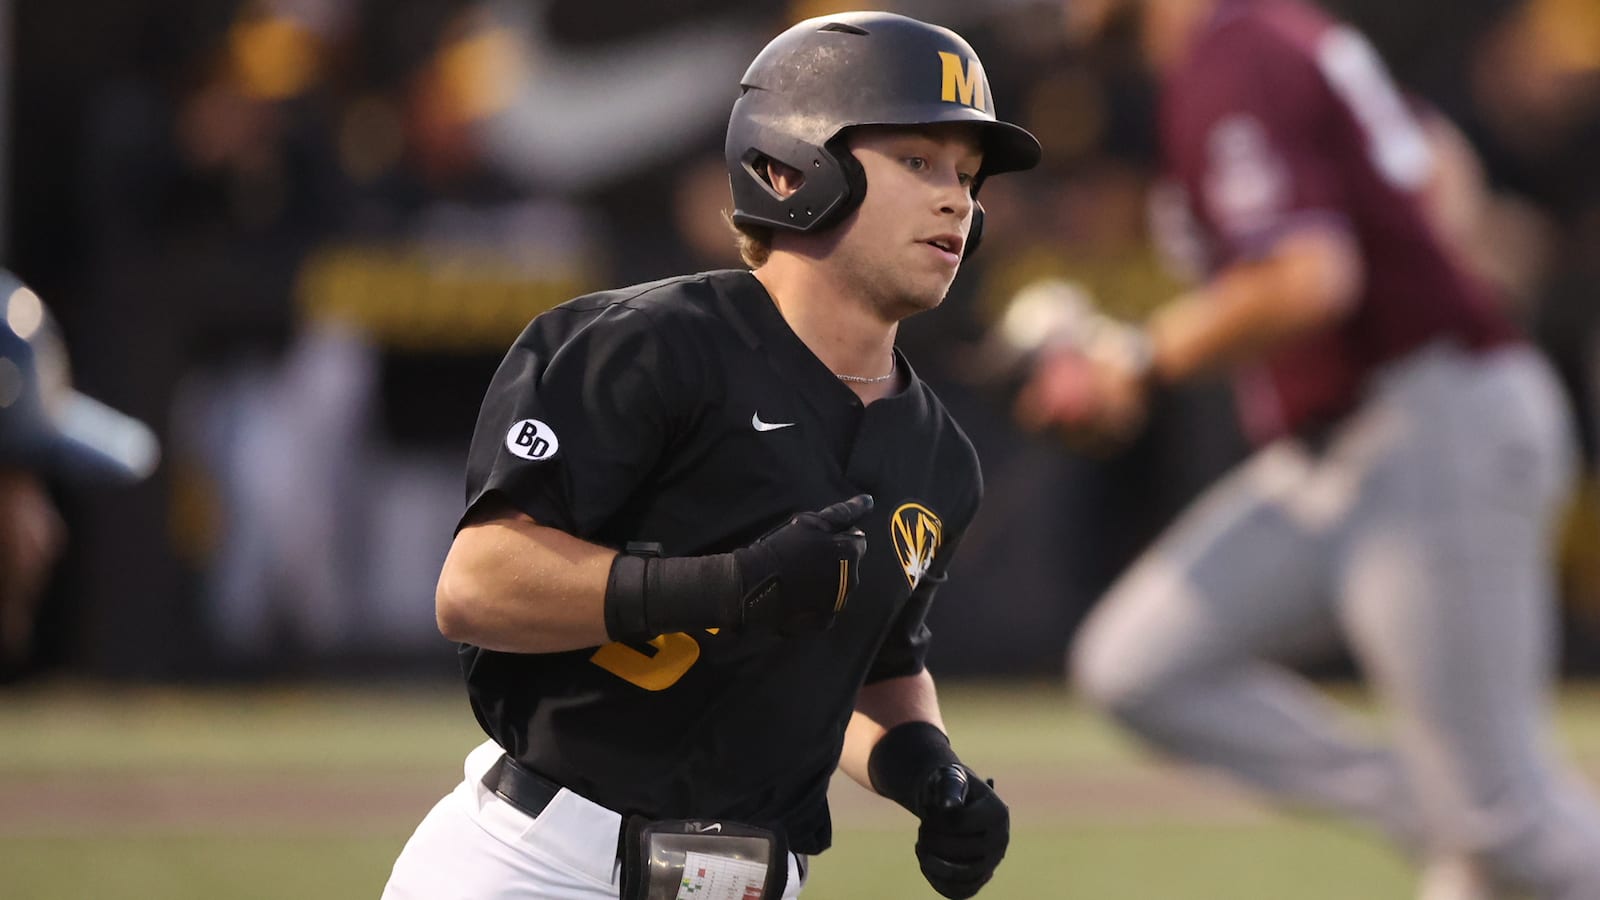 Missouri Baseball vs No. 3 Tennessee: Series Preview & Key Players Revealed